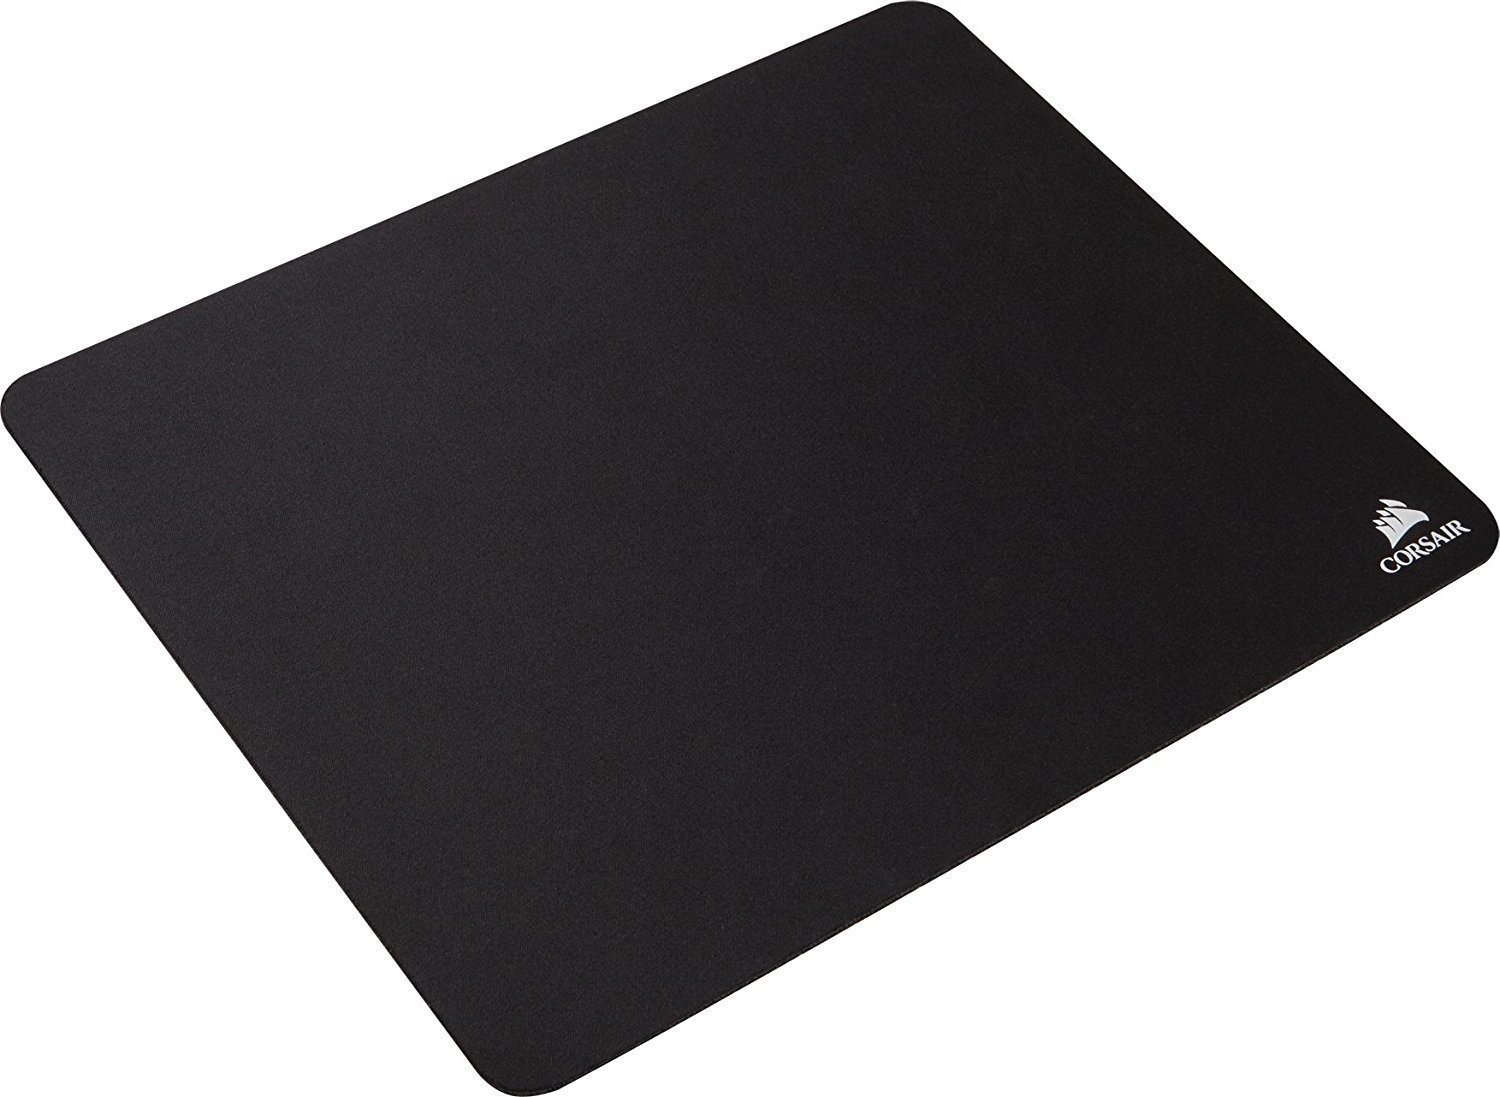 Mouse Pad Corsair MM100 Lateral view